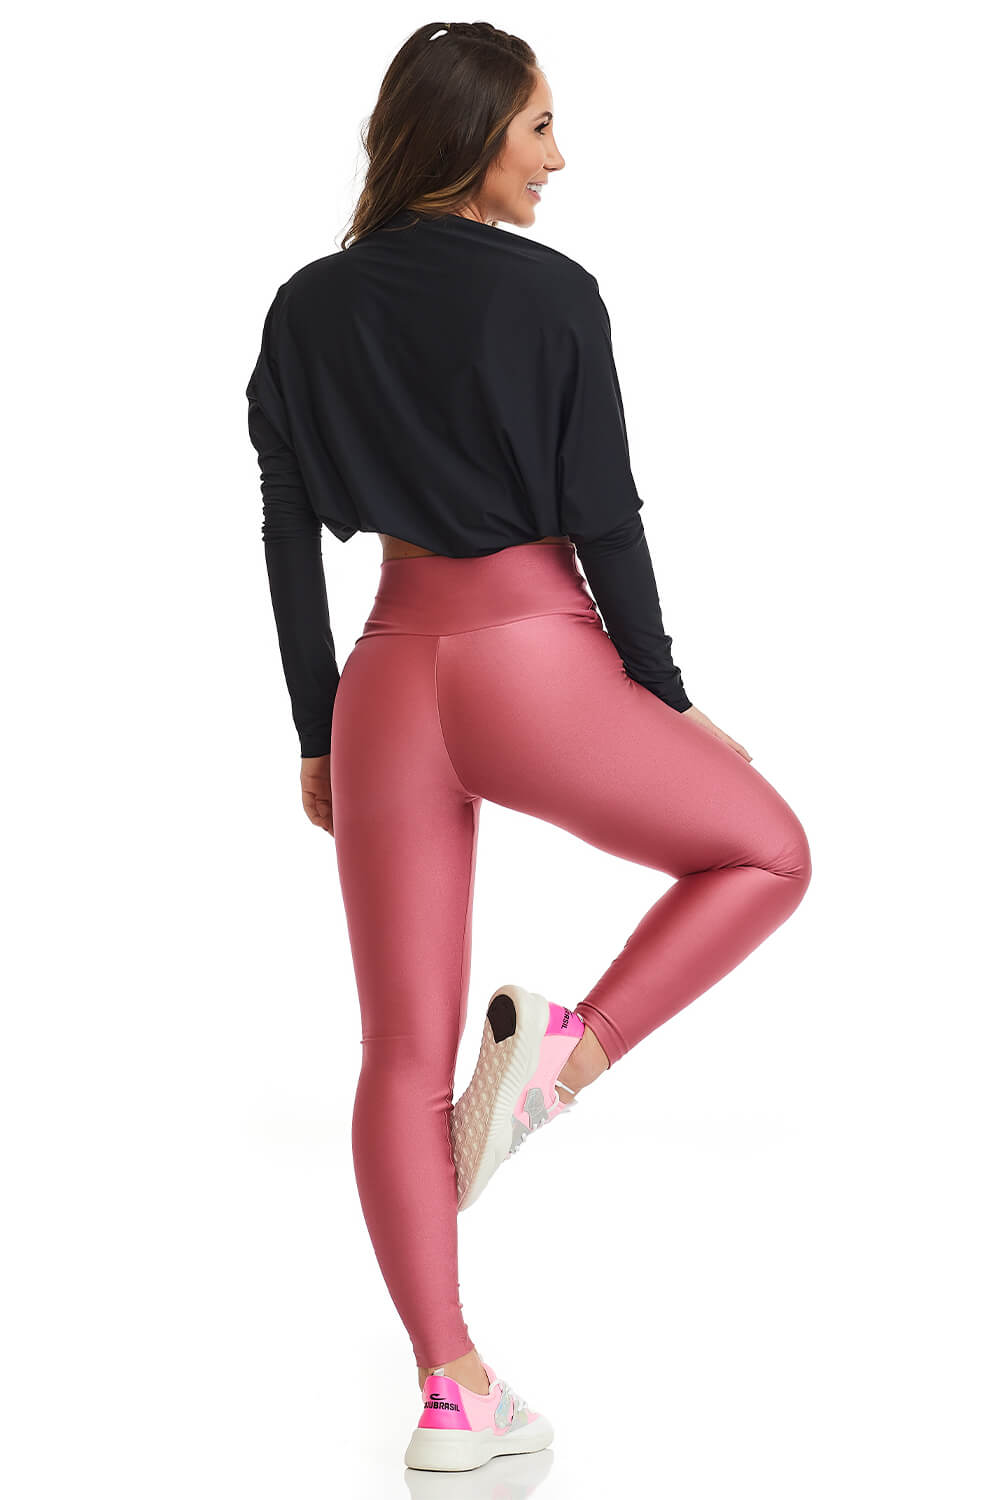 Coverup Magic- Leggings for Working Out